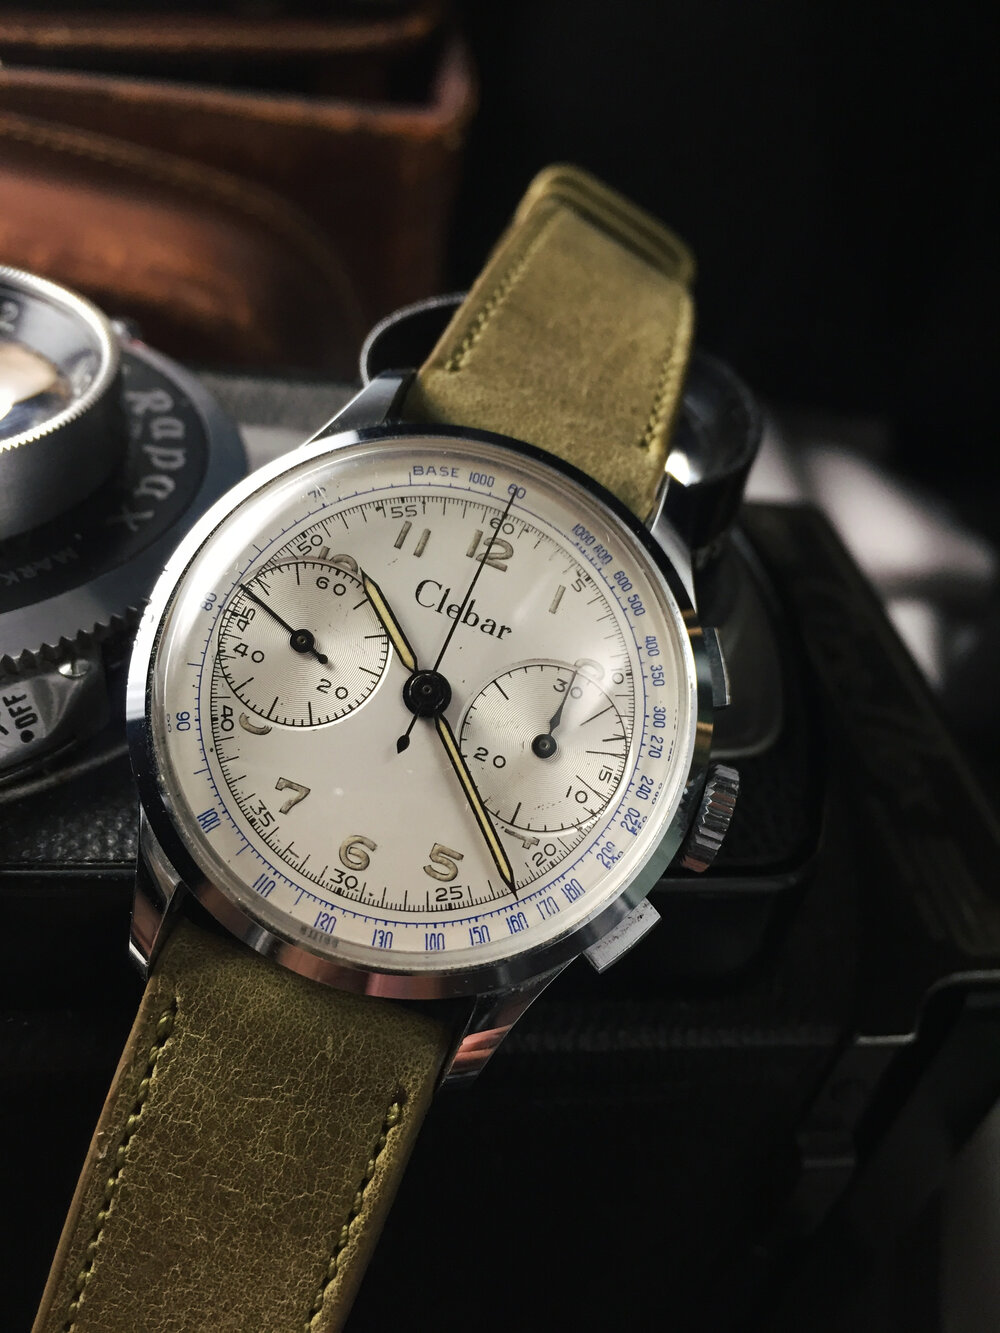 Late 50's Swiss Clebar Chronograph — Cool Vintage Watches